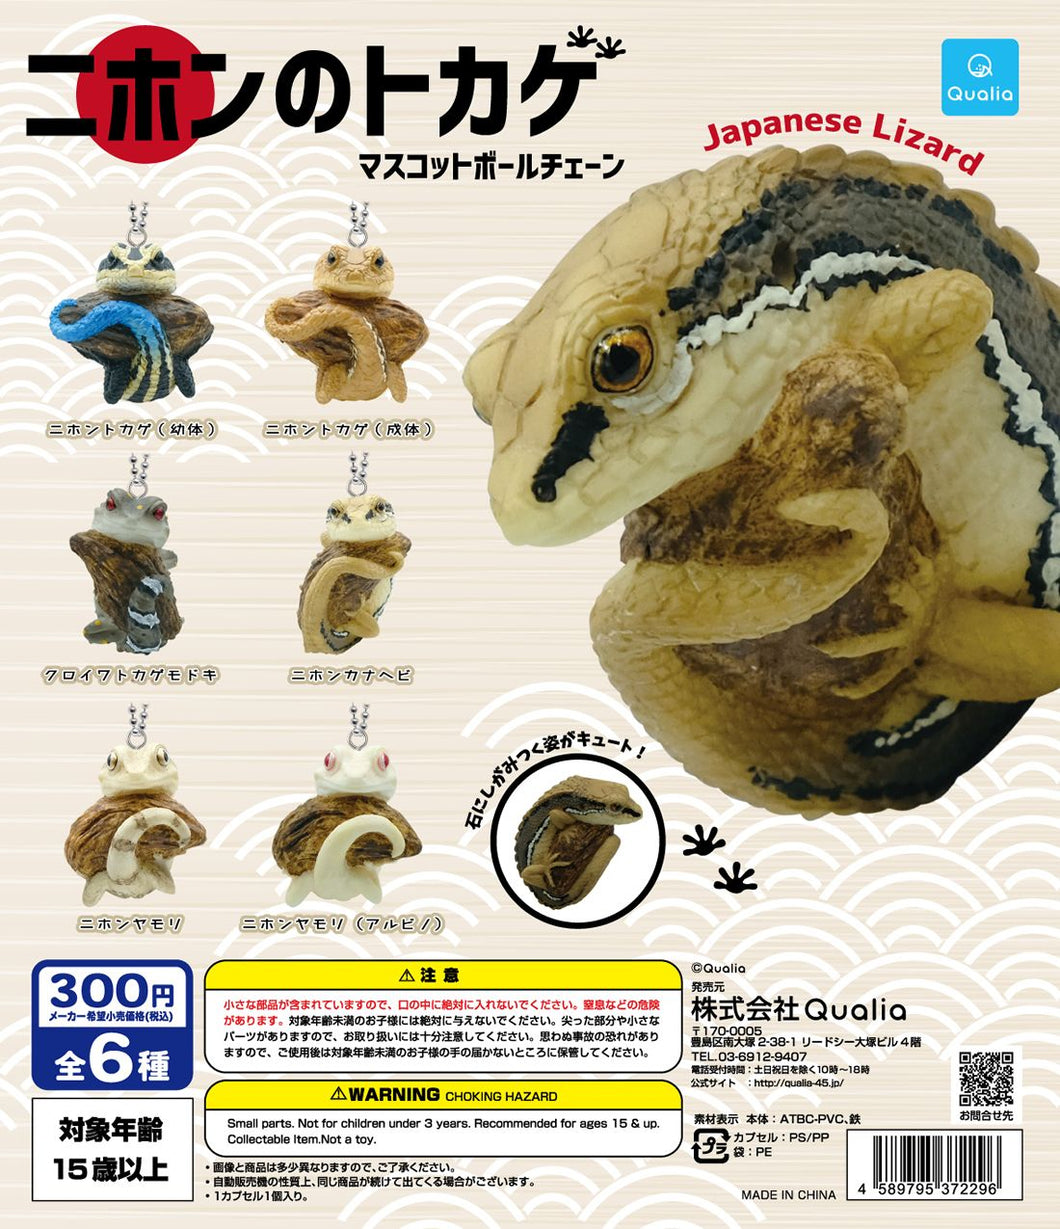 (Gashapon) Japanese Lizard (6 types in total)